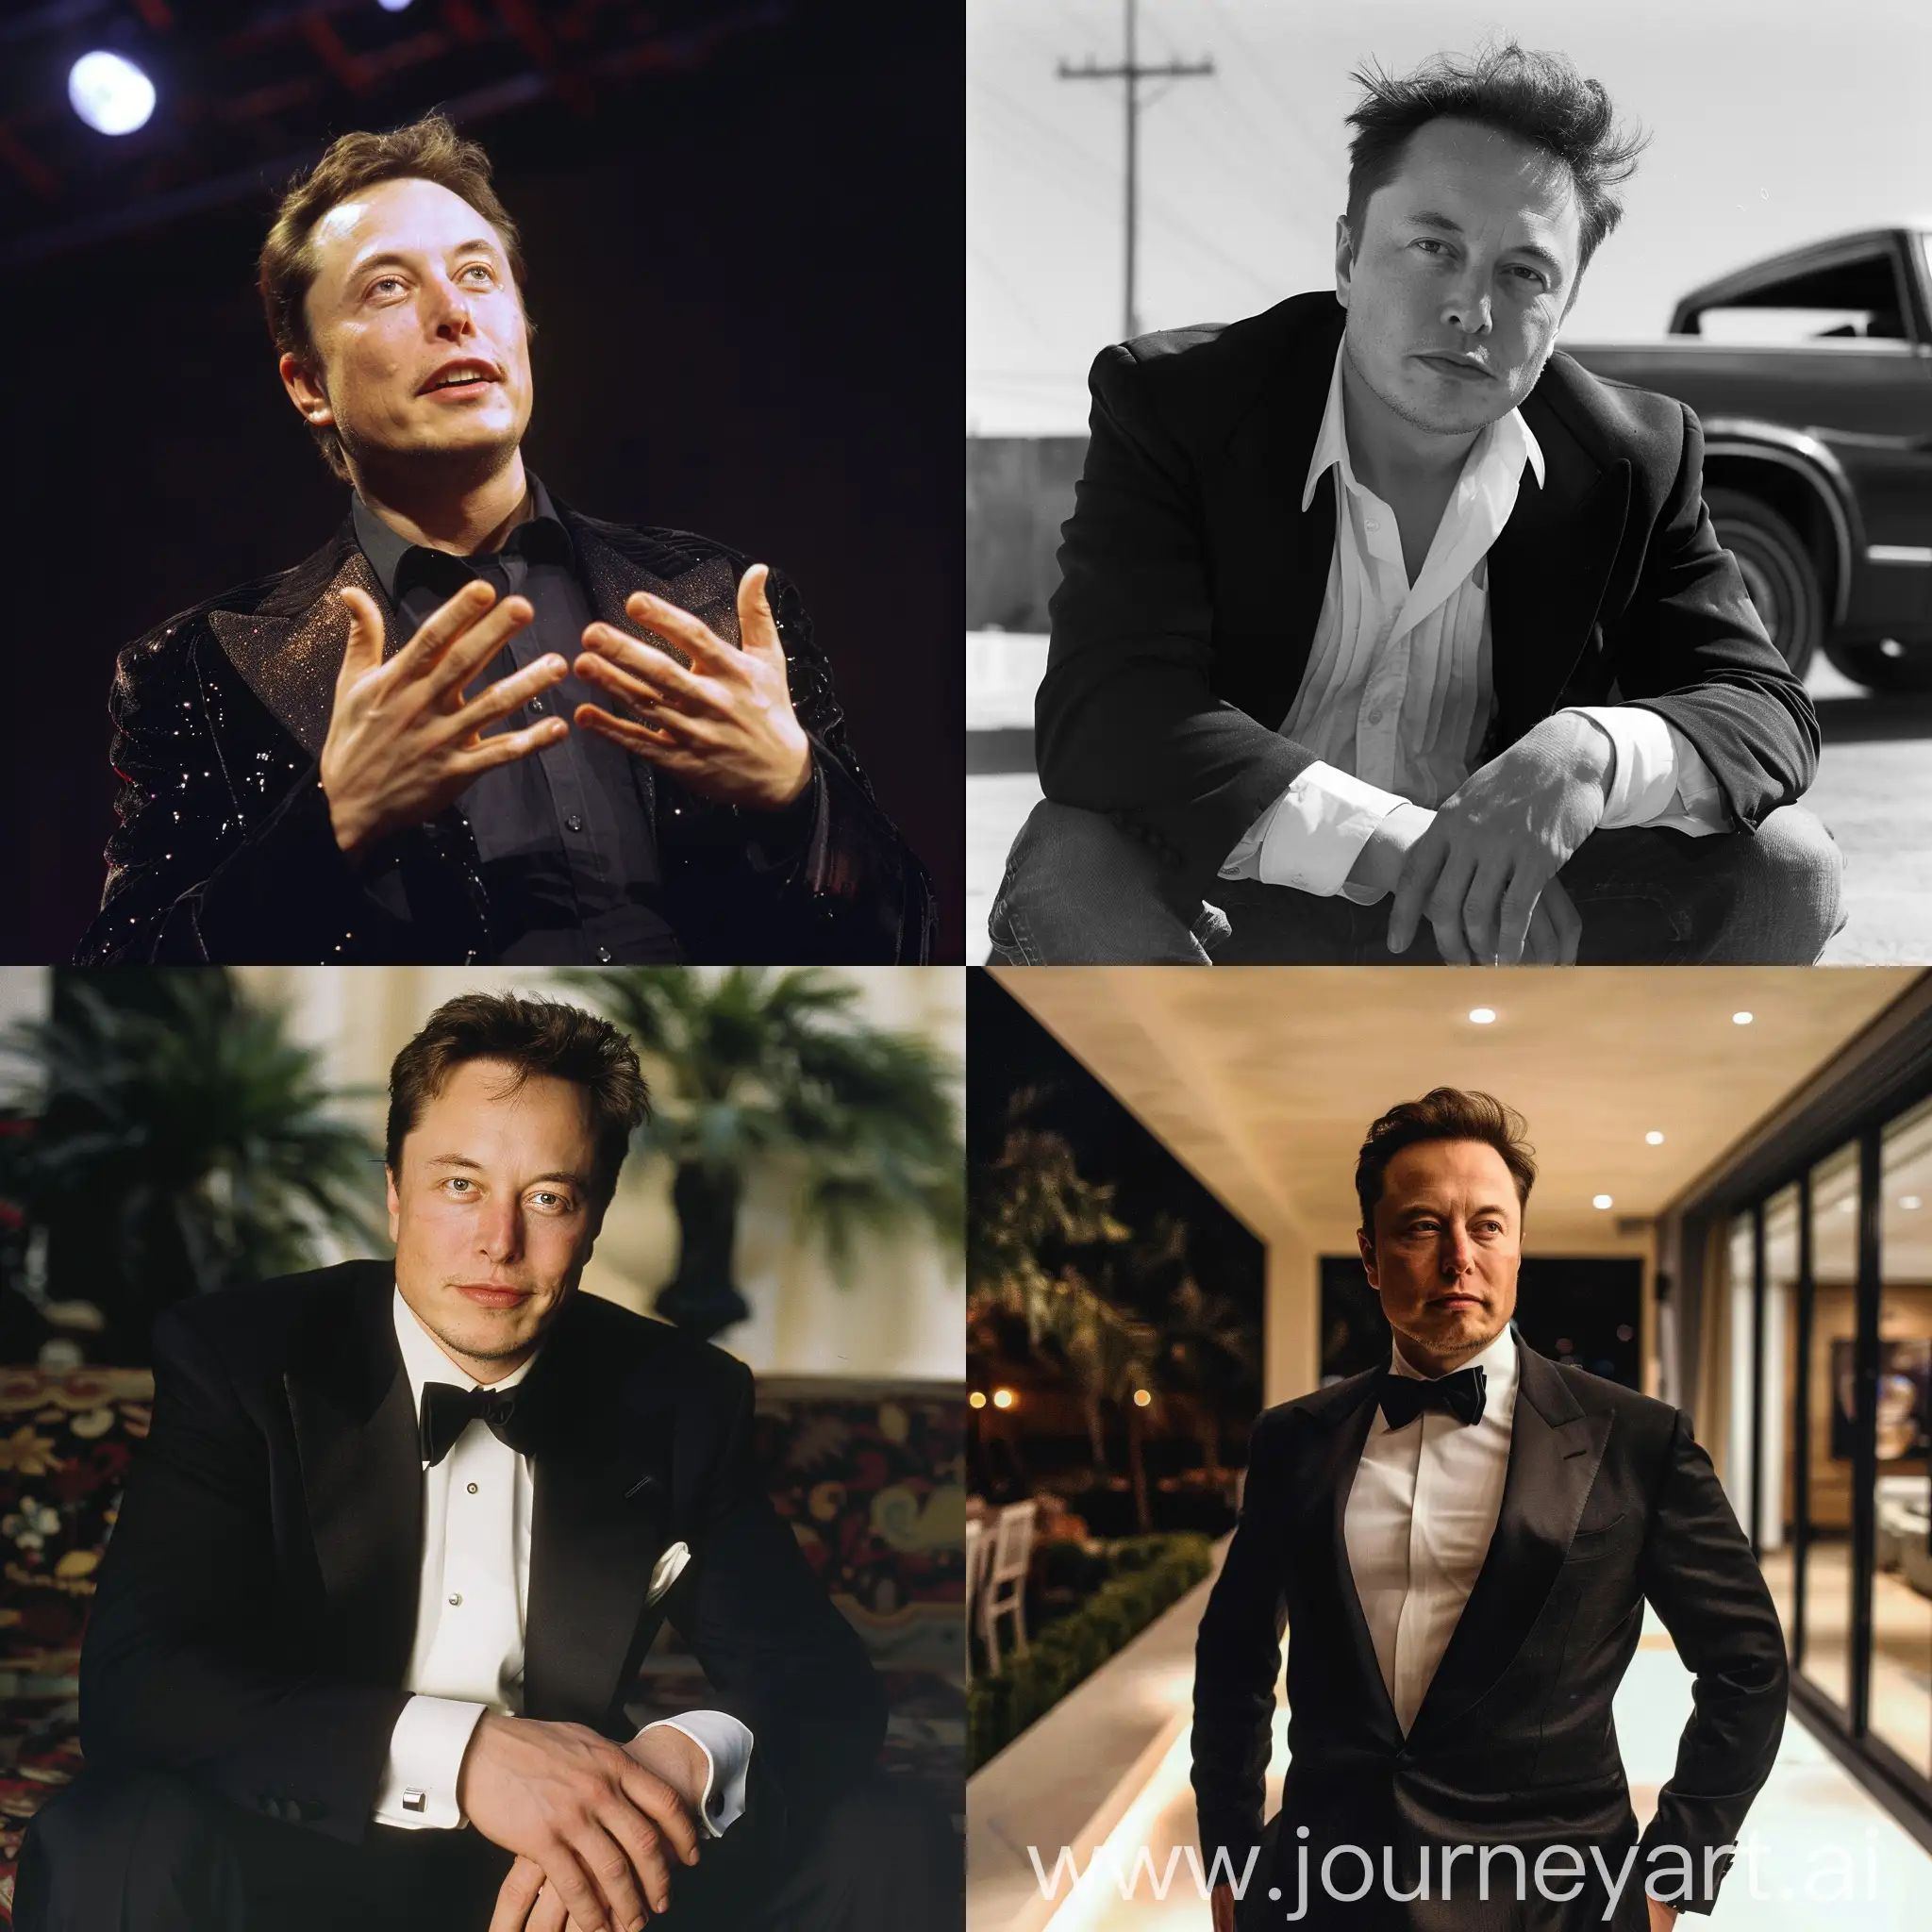 Elon-Musk-Lifestyle-in-1991-Visionary-Tech-Entrepreneur-in-Retro-Style